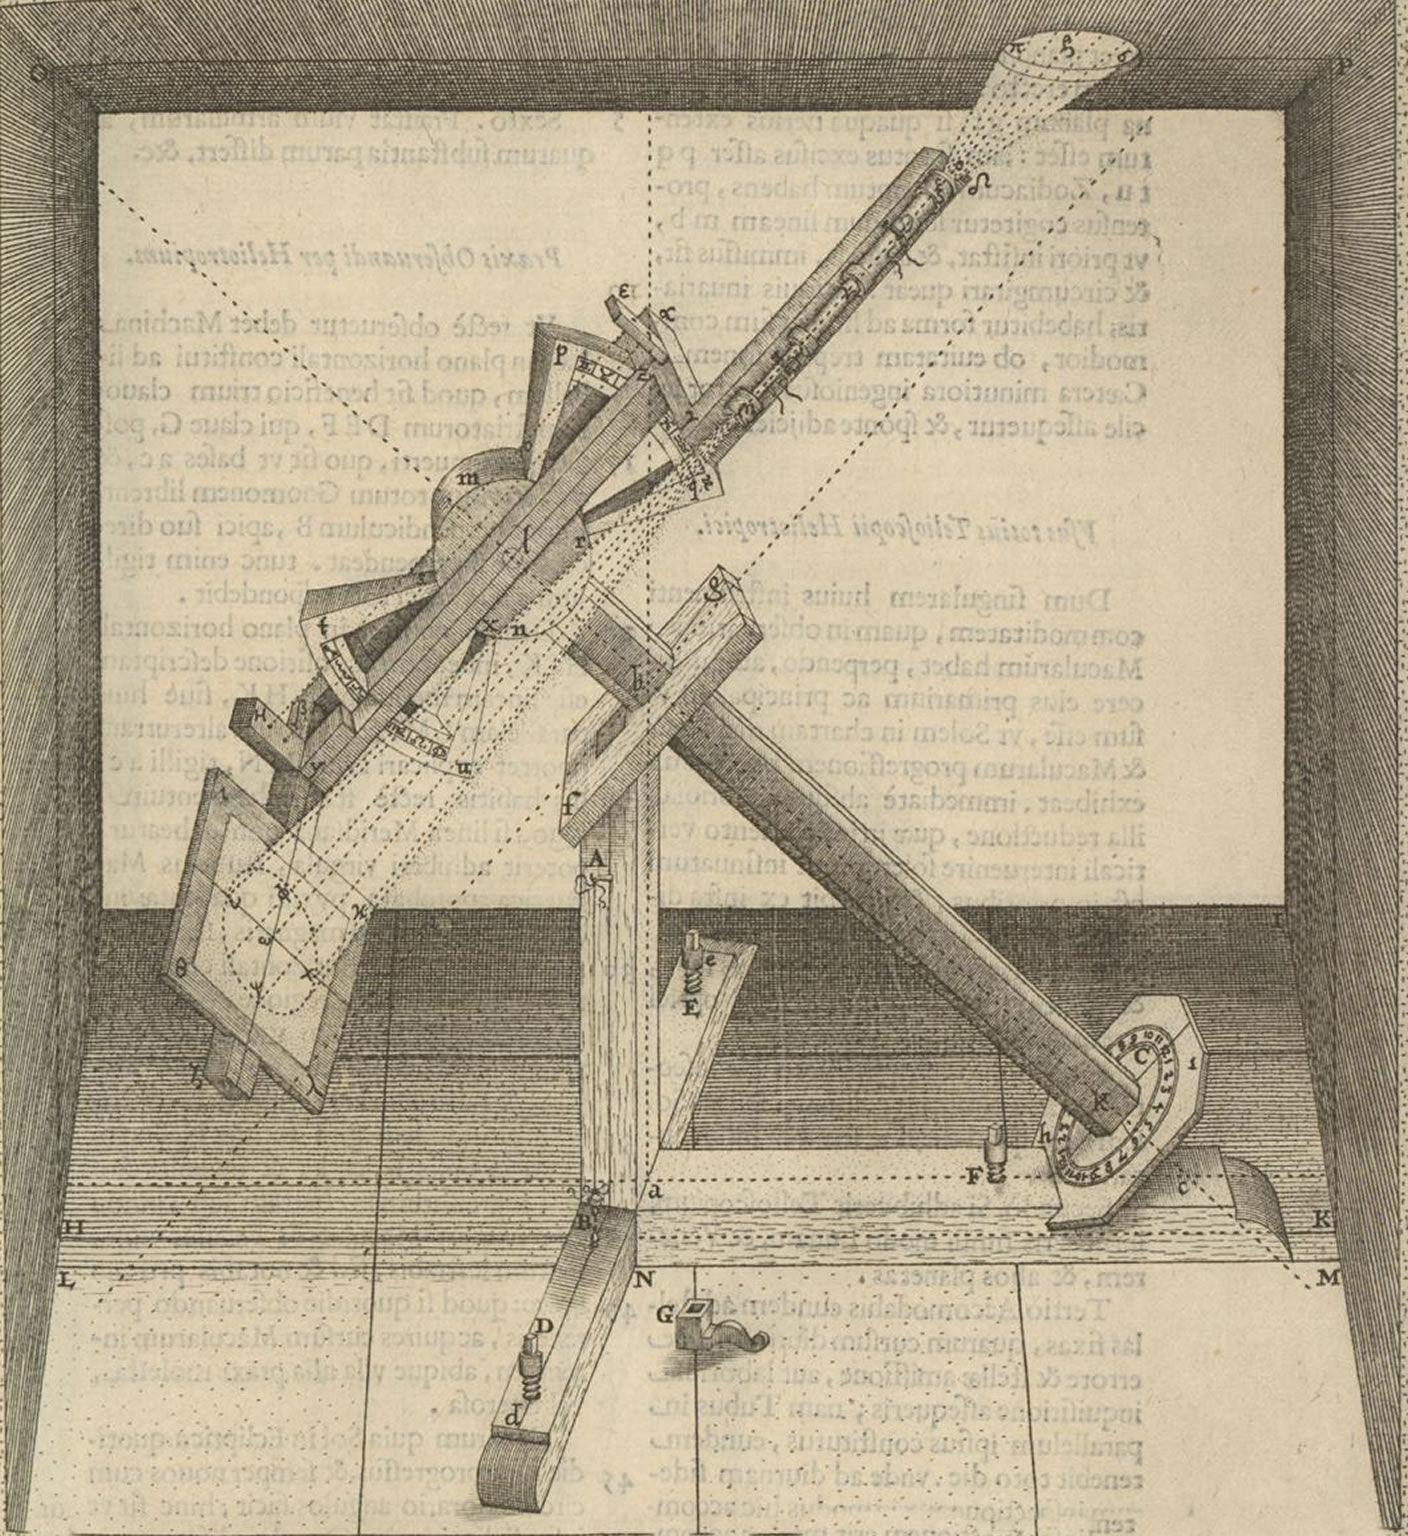 Helioscope From the Rosa Ursina, by Christoph Scheiner, invented by Jesuit father Christoph Grienberger, with equatorial gear to observe the Sun and its spots. Rare Books. Rar_10152_GF. e-rara.ch